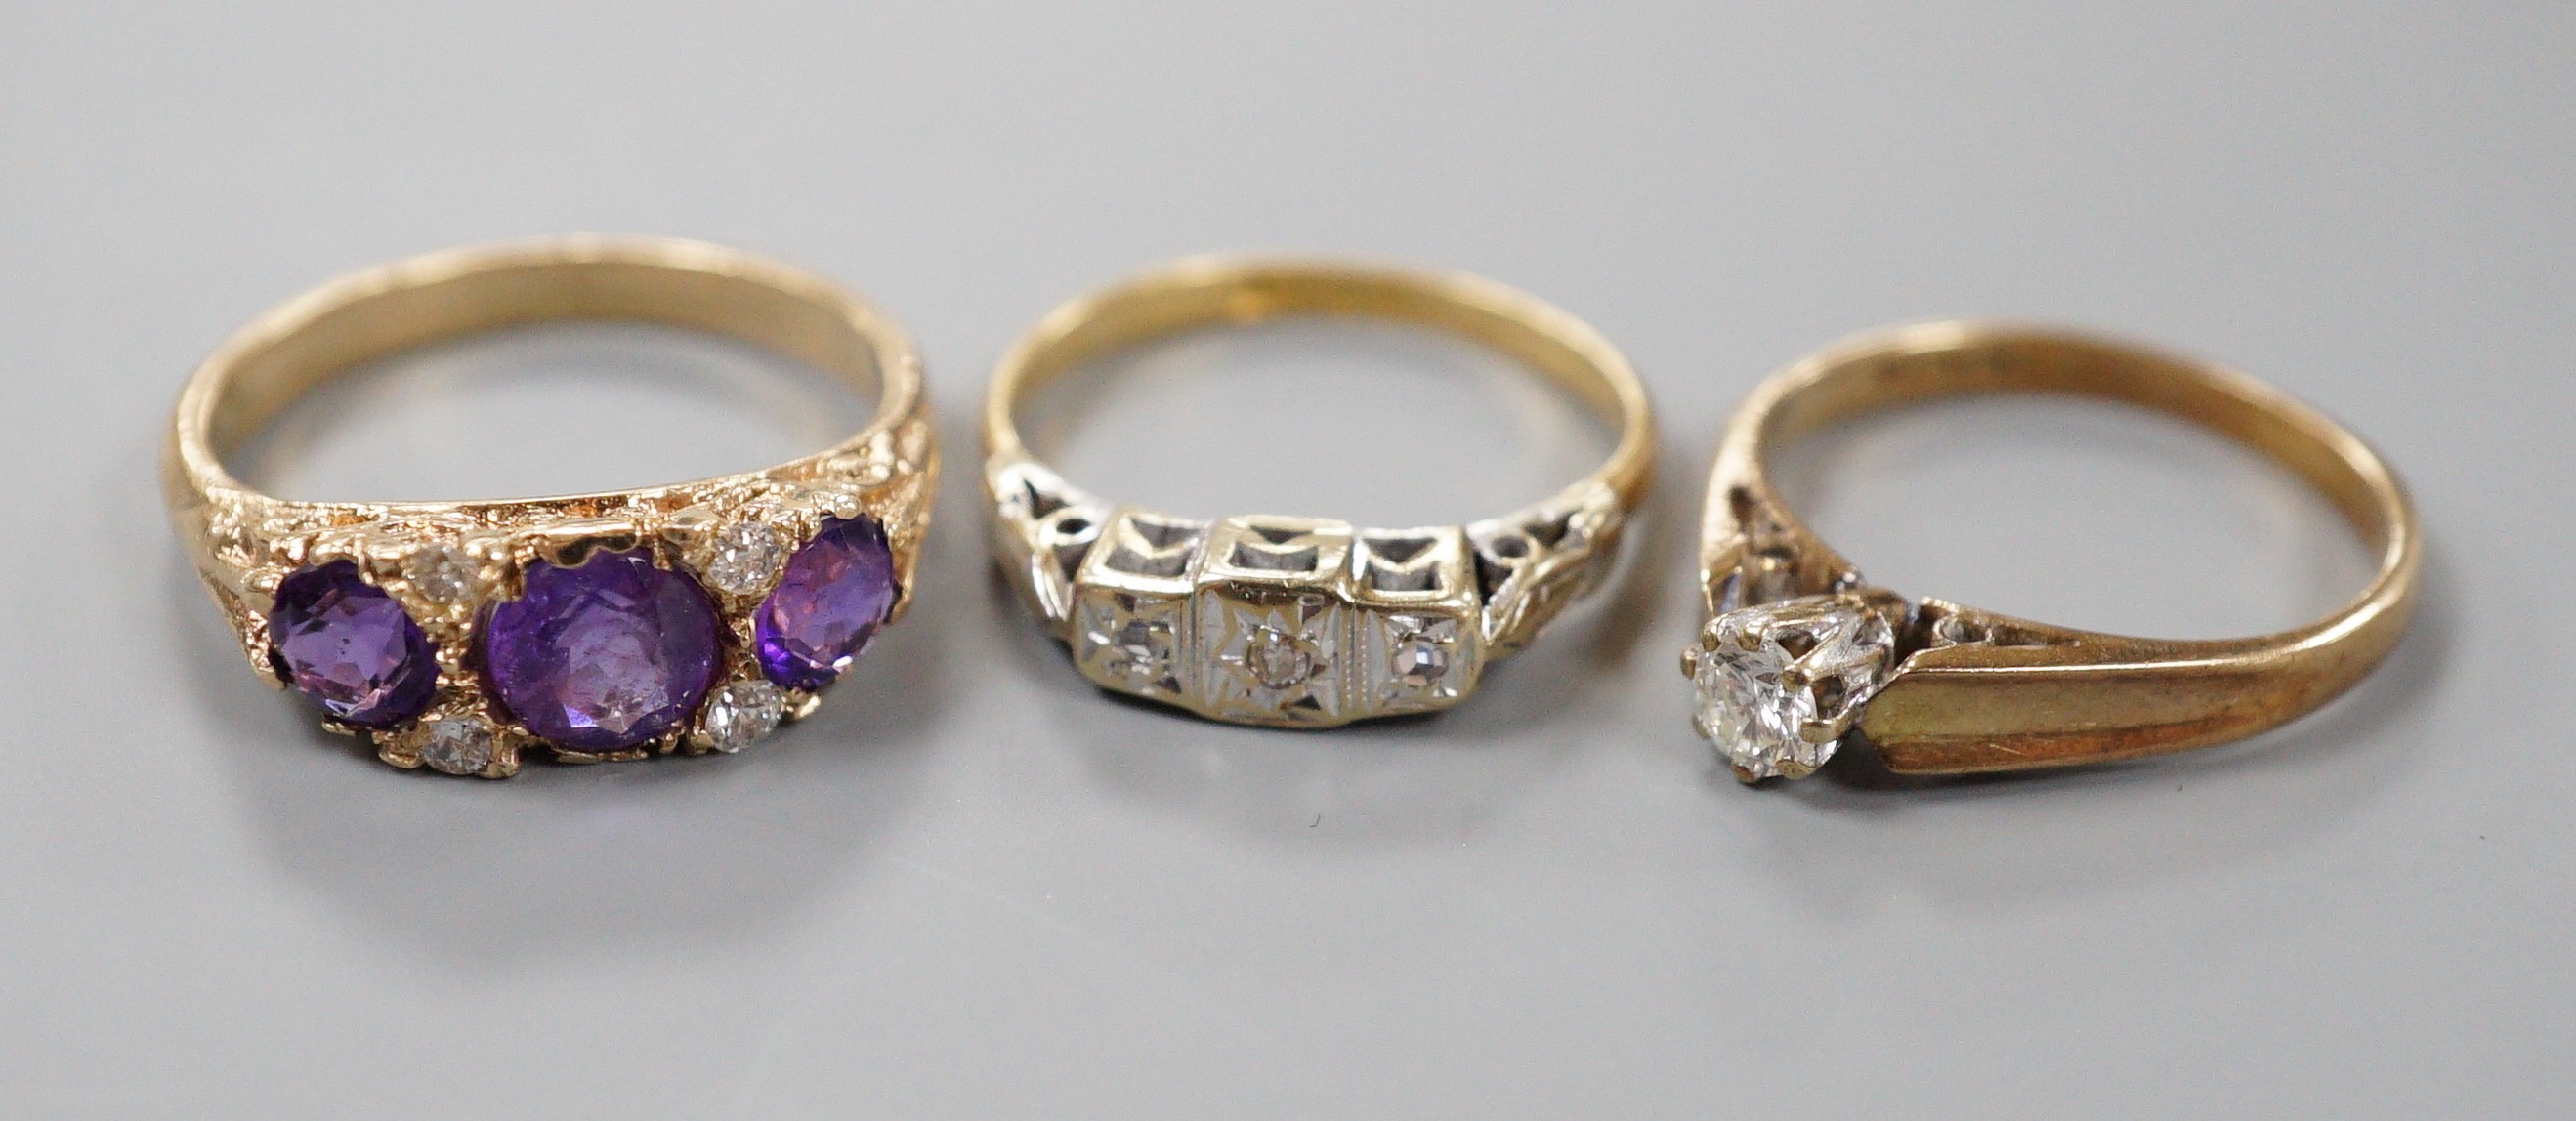 An 18ct and illusion set three stone diamond ring, gross 2.8 grams and two 9ct and gem set rings including amethyst and diamond chip half hoop, gross 5.2 grams.